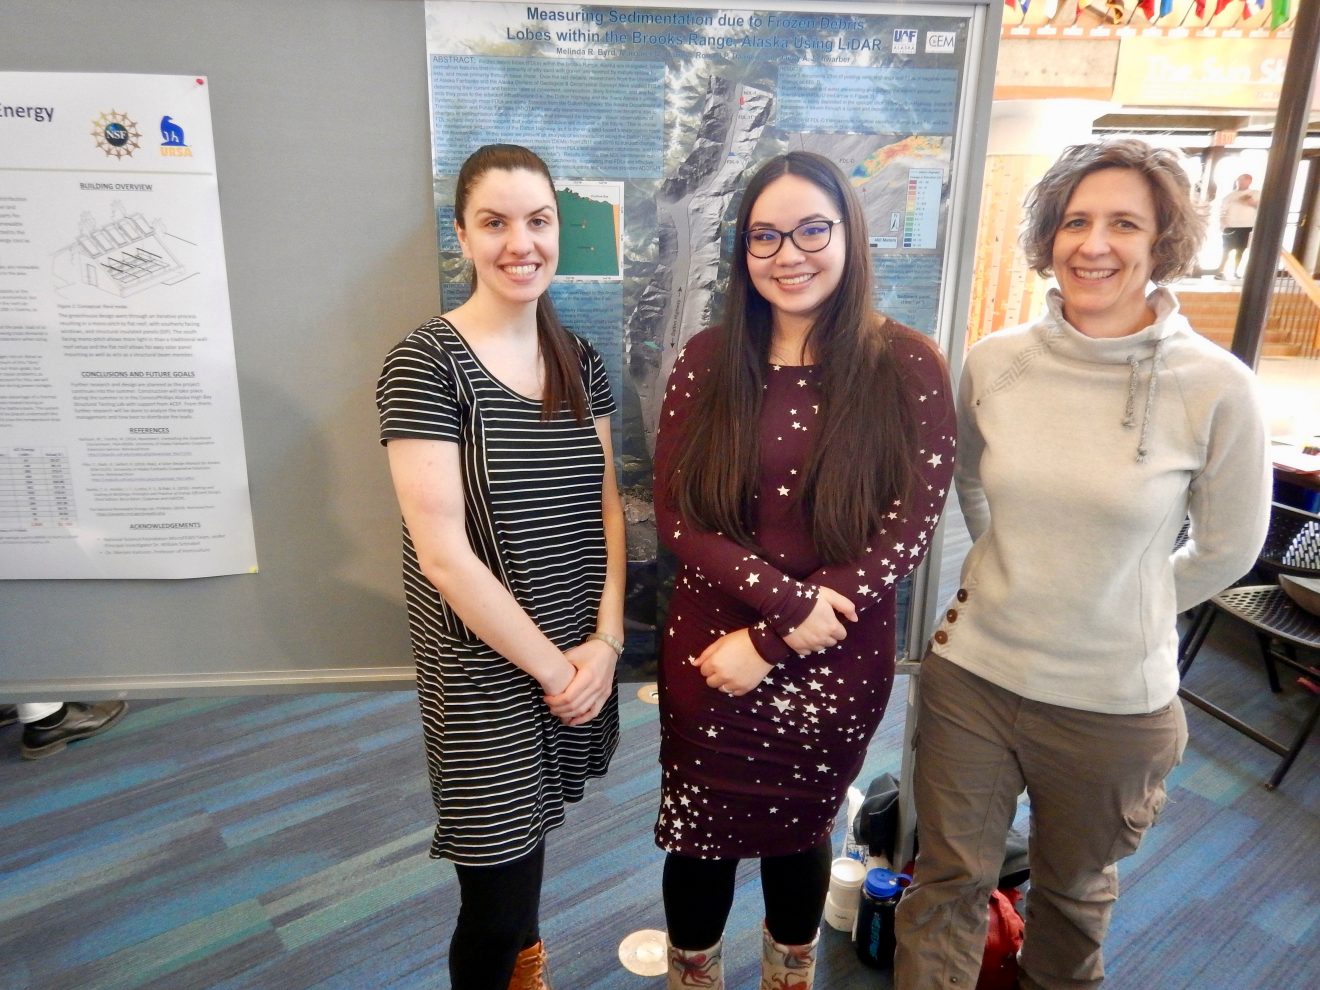 Three women stand in front of a board with two scientific posters on it. One poster is about energy, one is about LIDAR, but nothing more specific is visible.